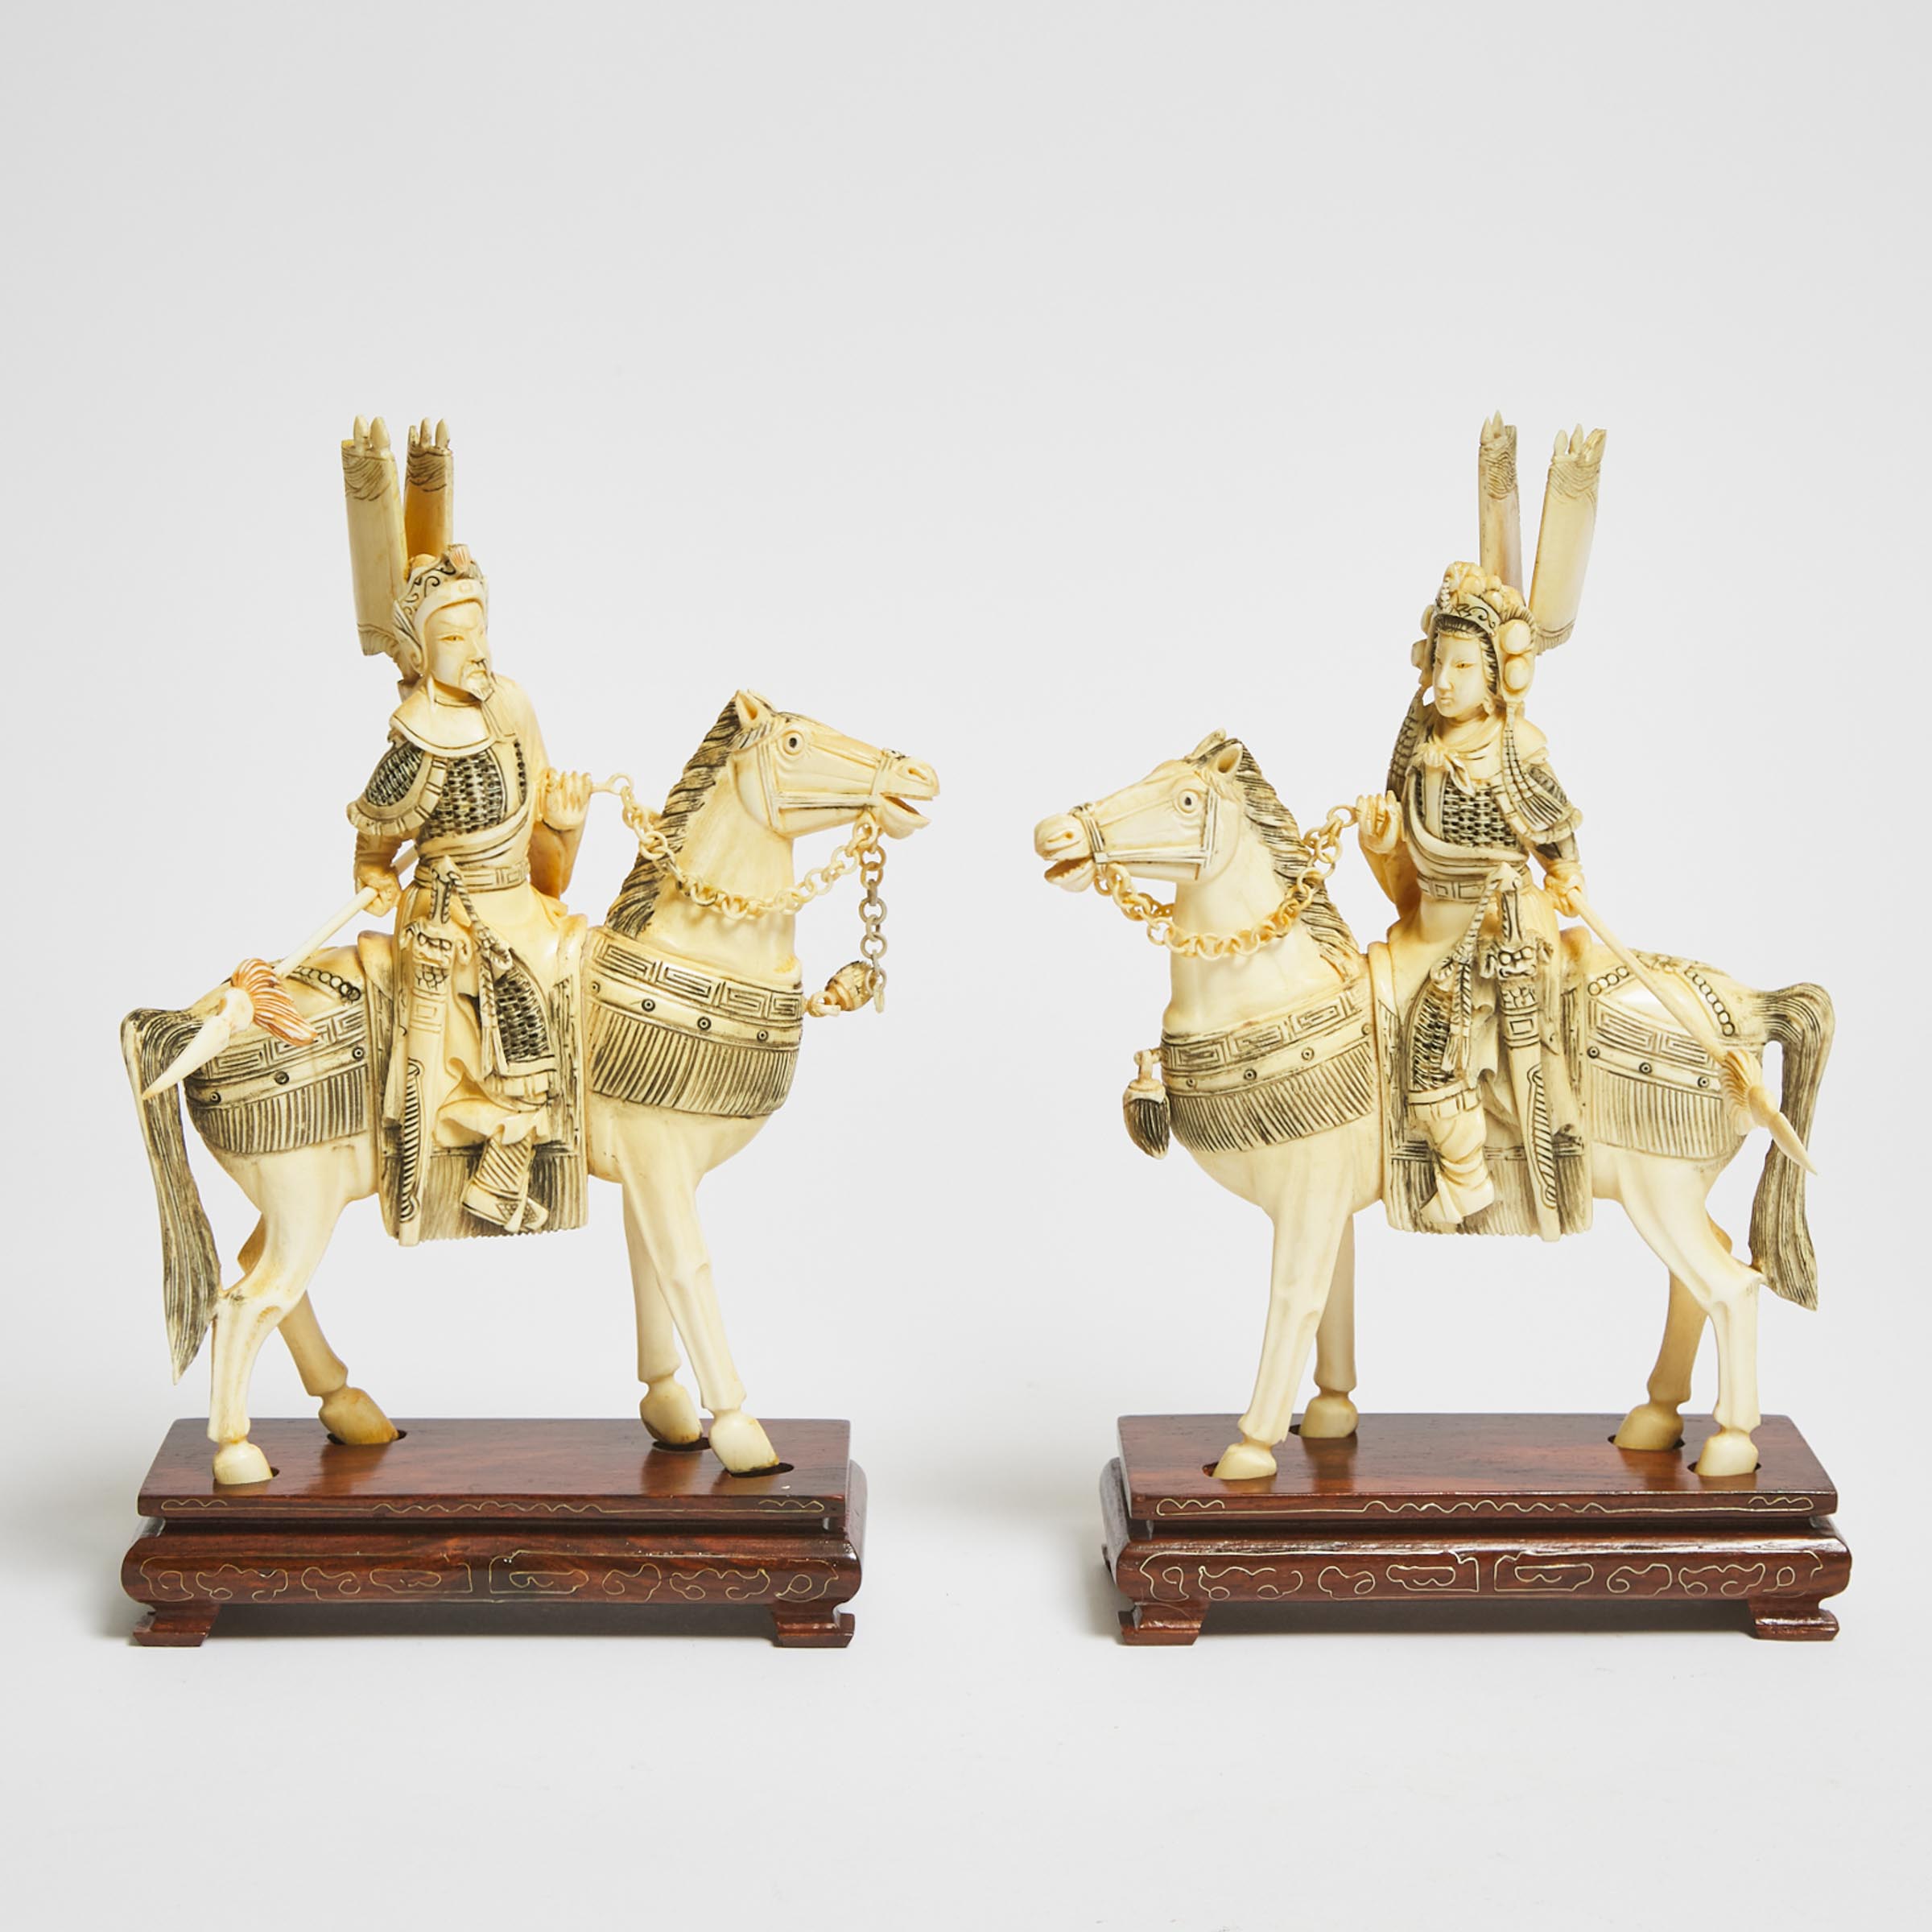 A Pair of Ivory Figures of King